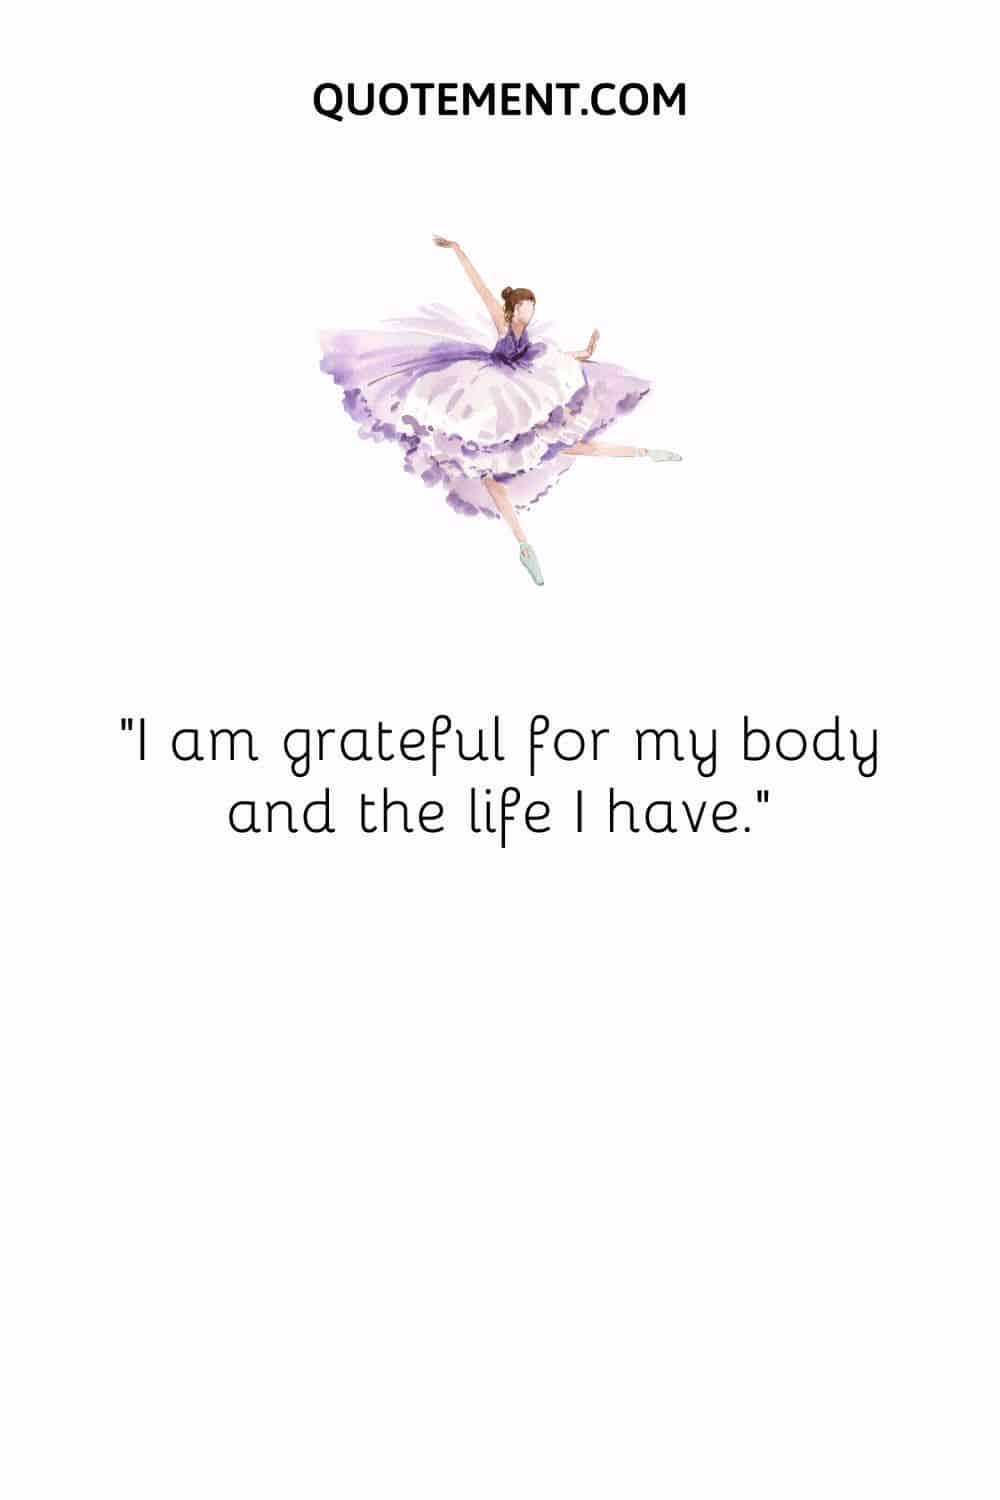 I am grateful for my body and the life I have